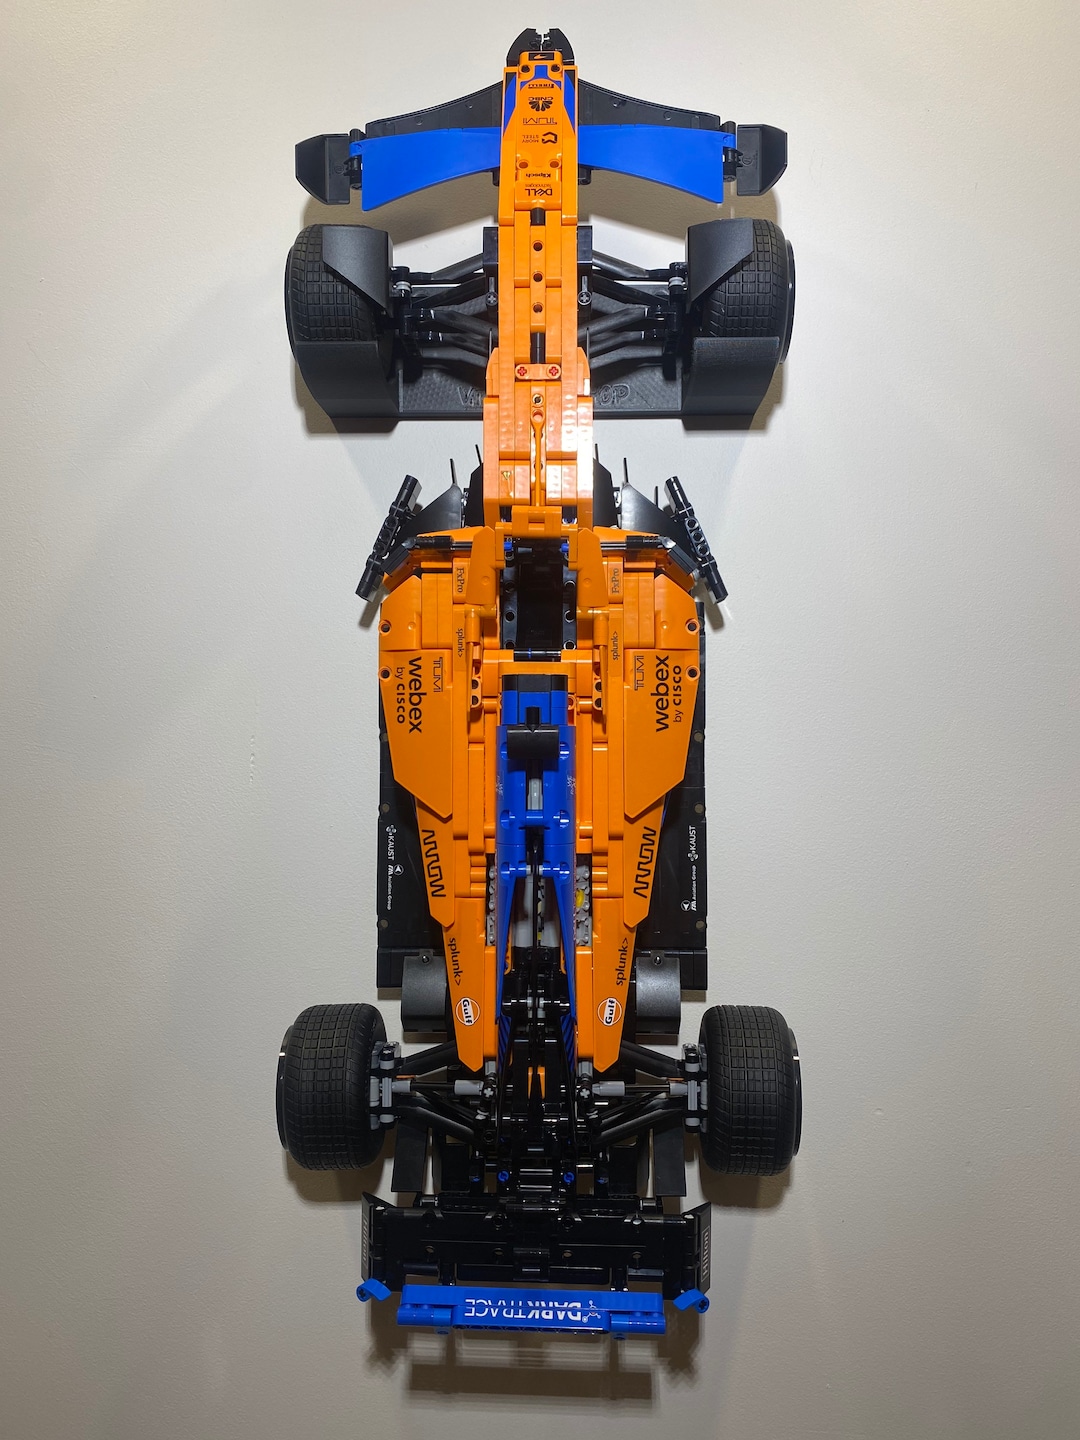 Wall Mounting for Lego Mclaren F1 - Etsy